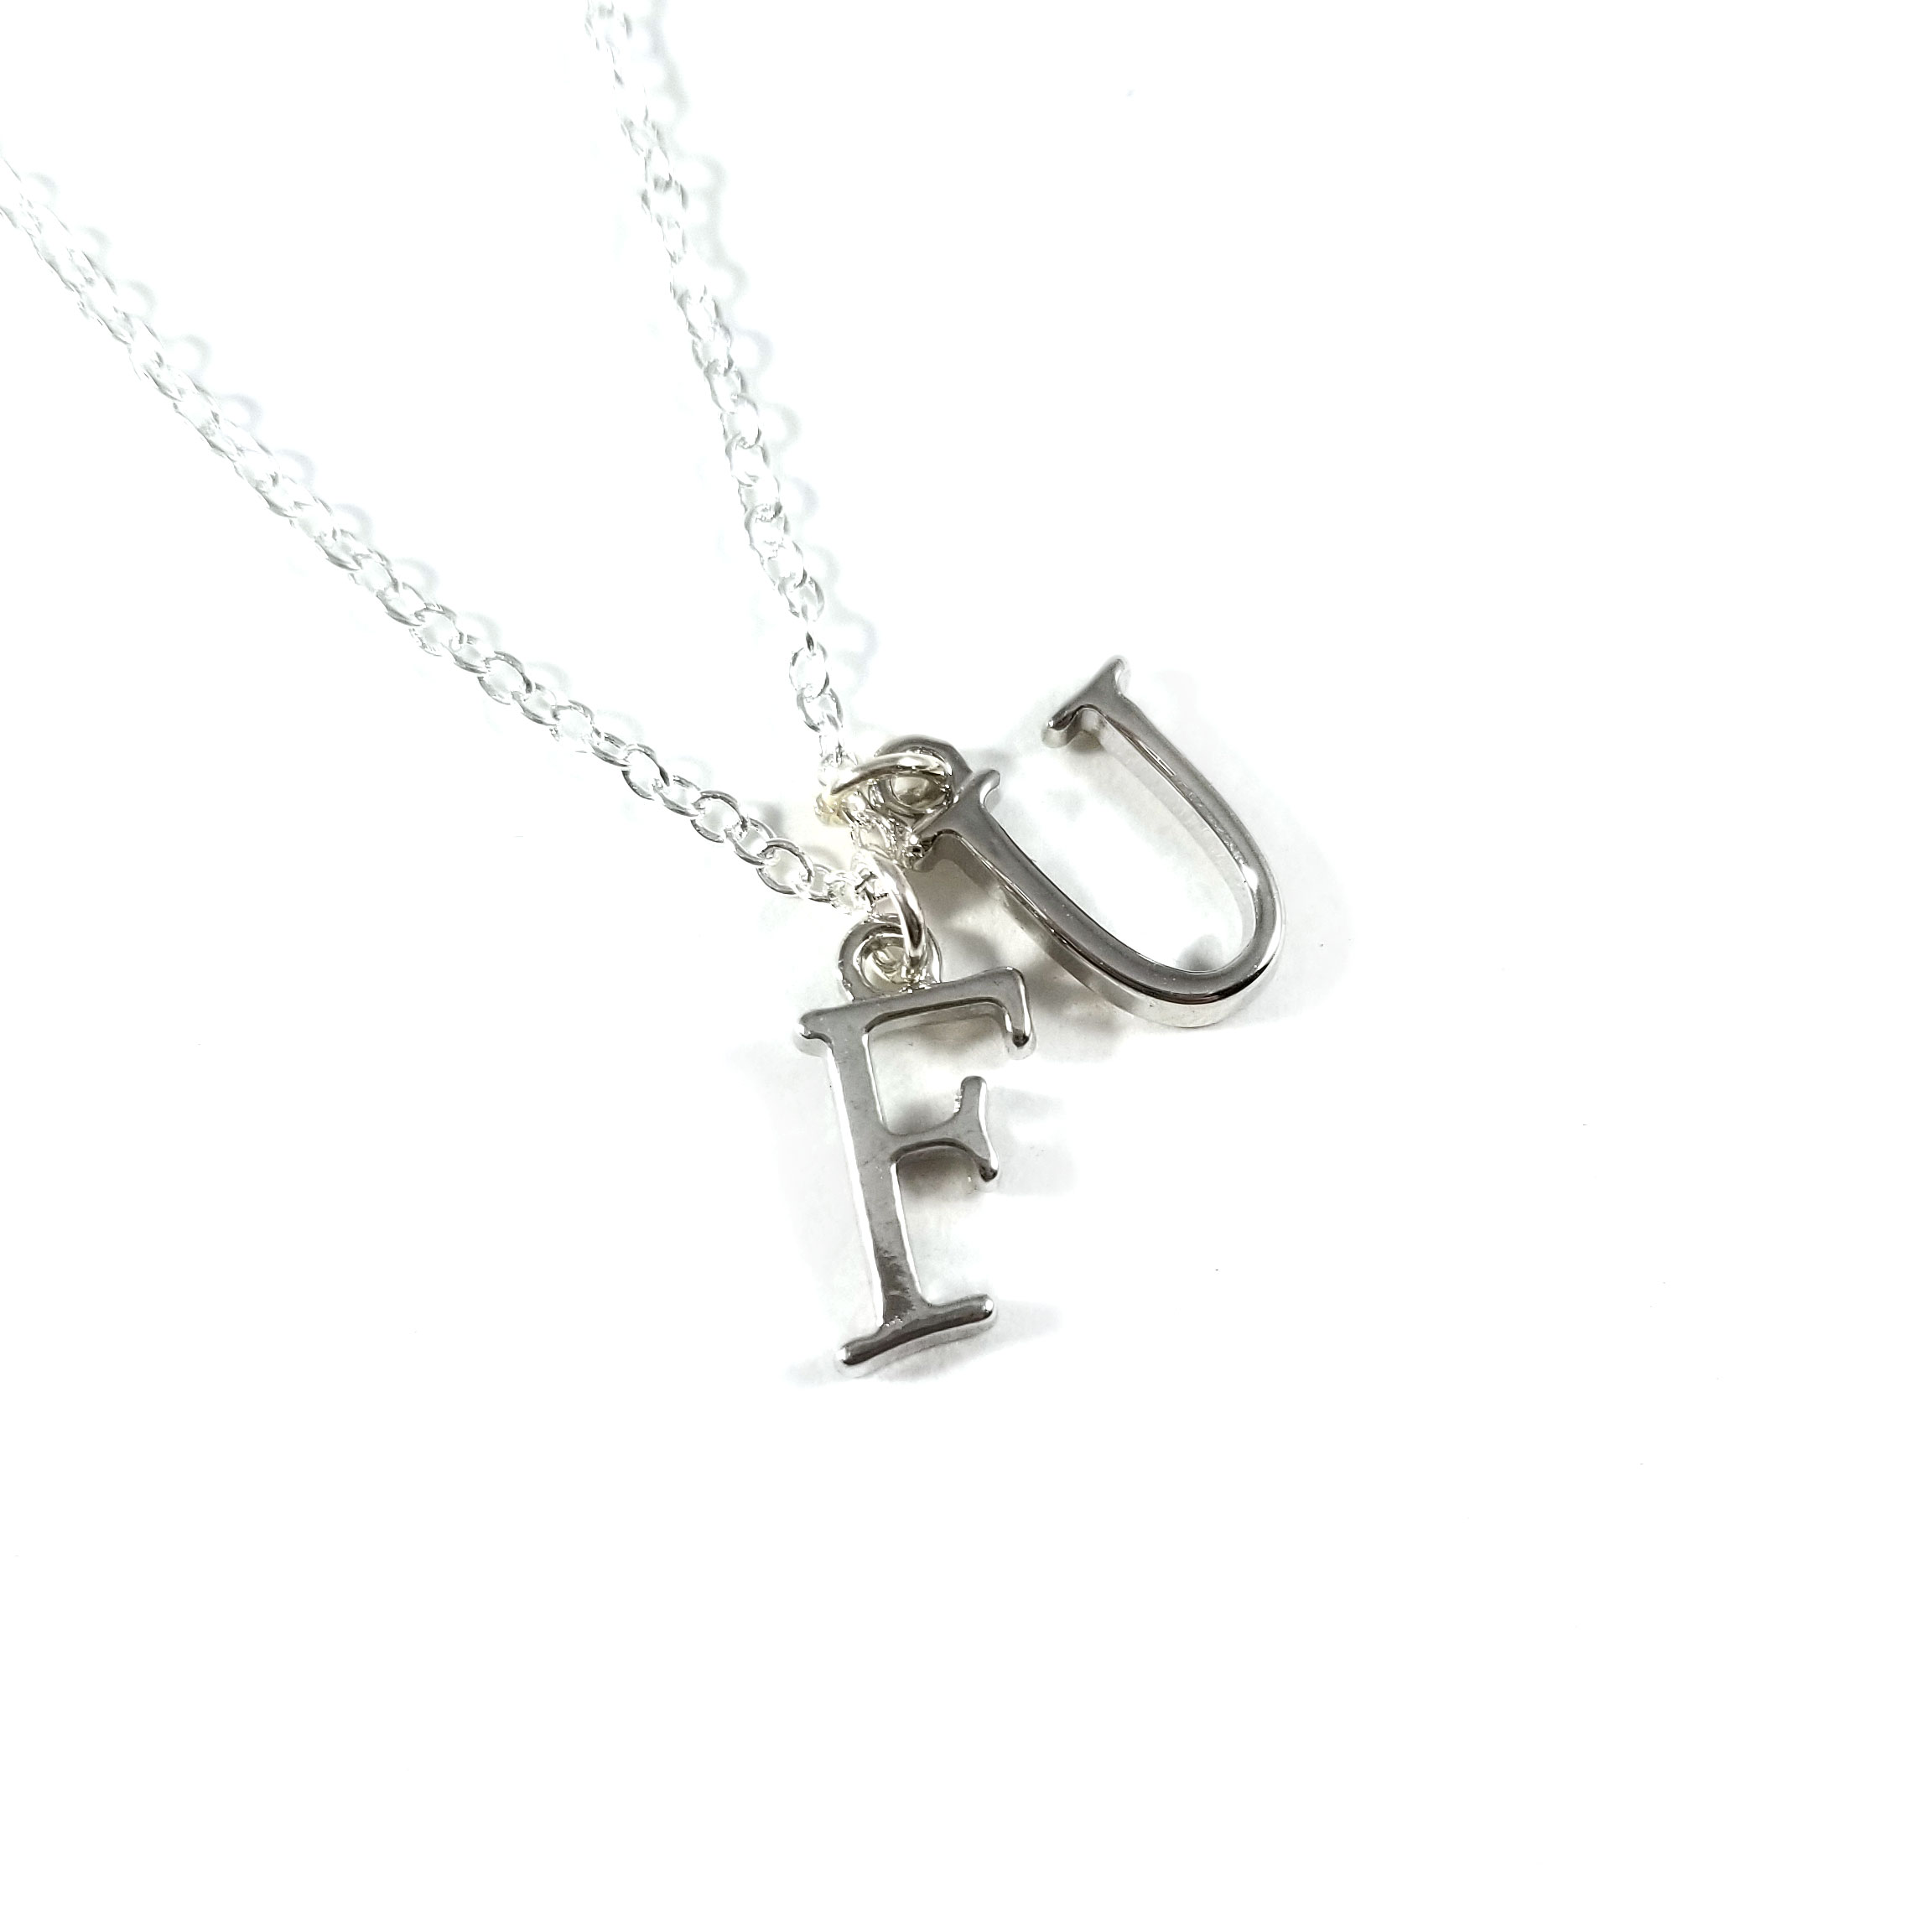 FU Humorous Necklace in Serif by Wilde Designs